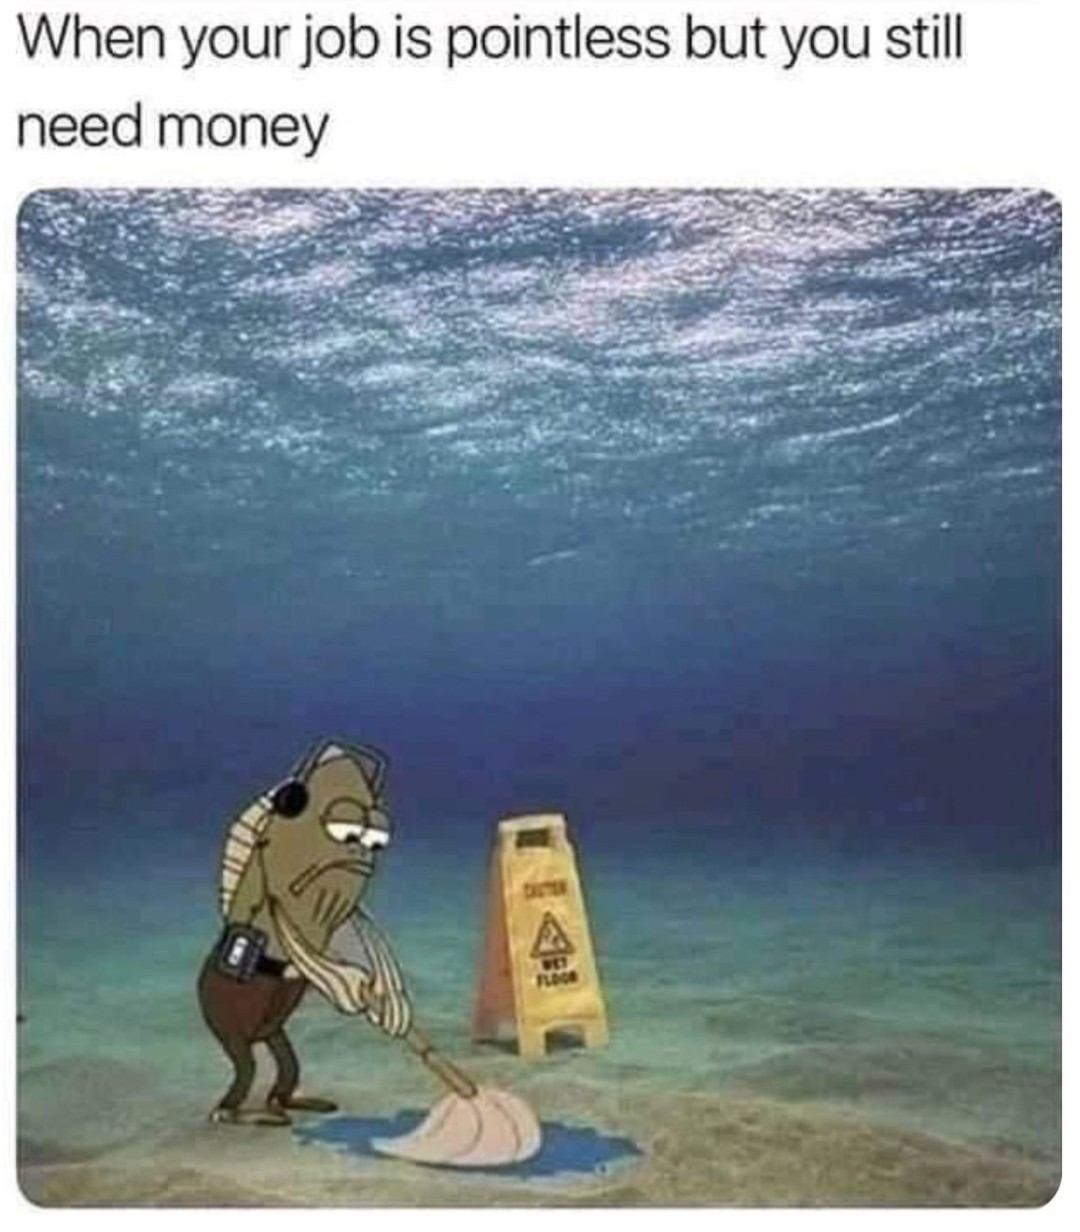 dank memes - funny memes - pointless job meme - When your job is pointless but you still need money A Flogo